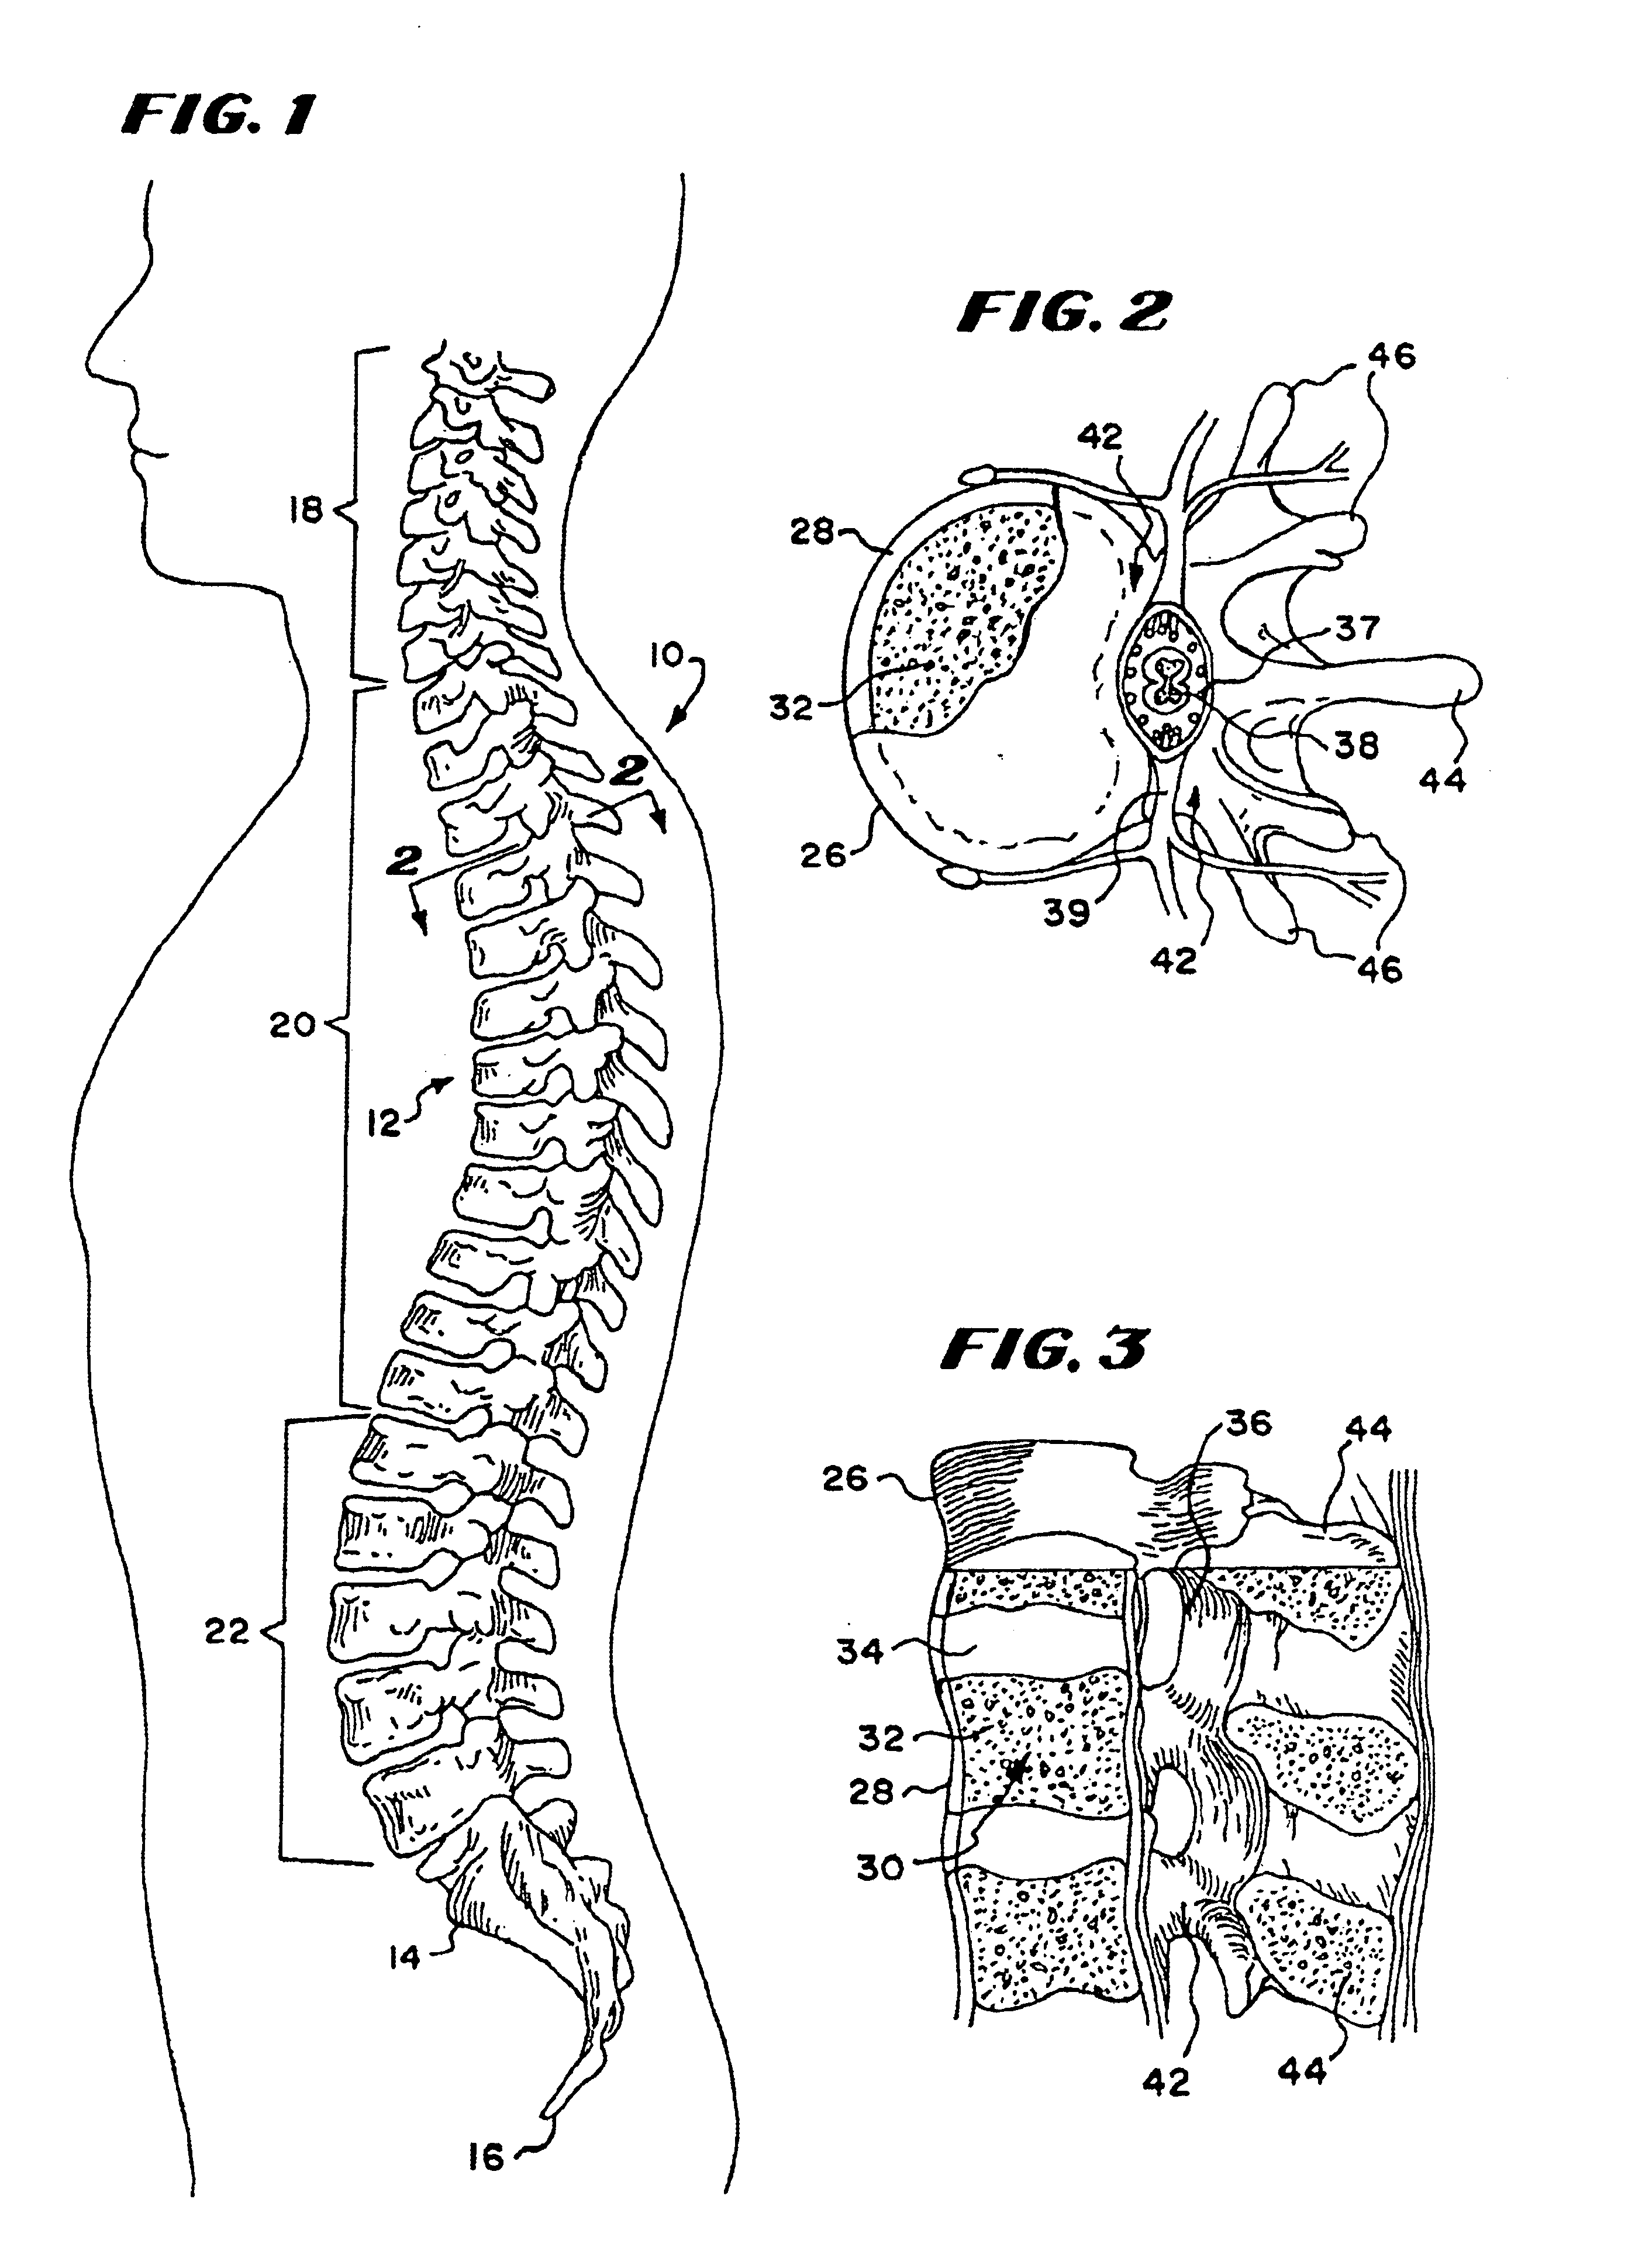 Systems and methods for treating fractured or diseased bone using expandable bodies